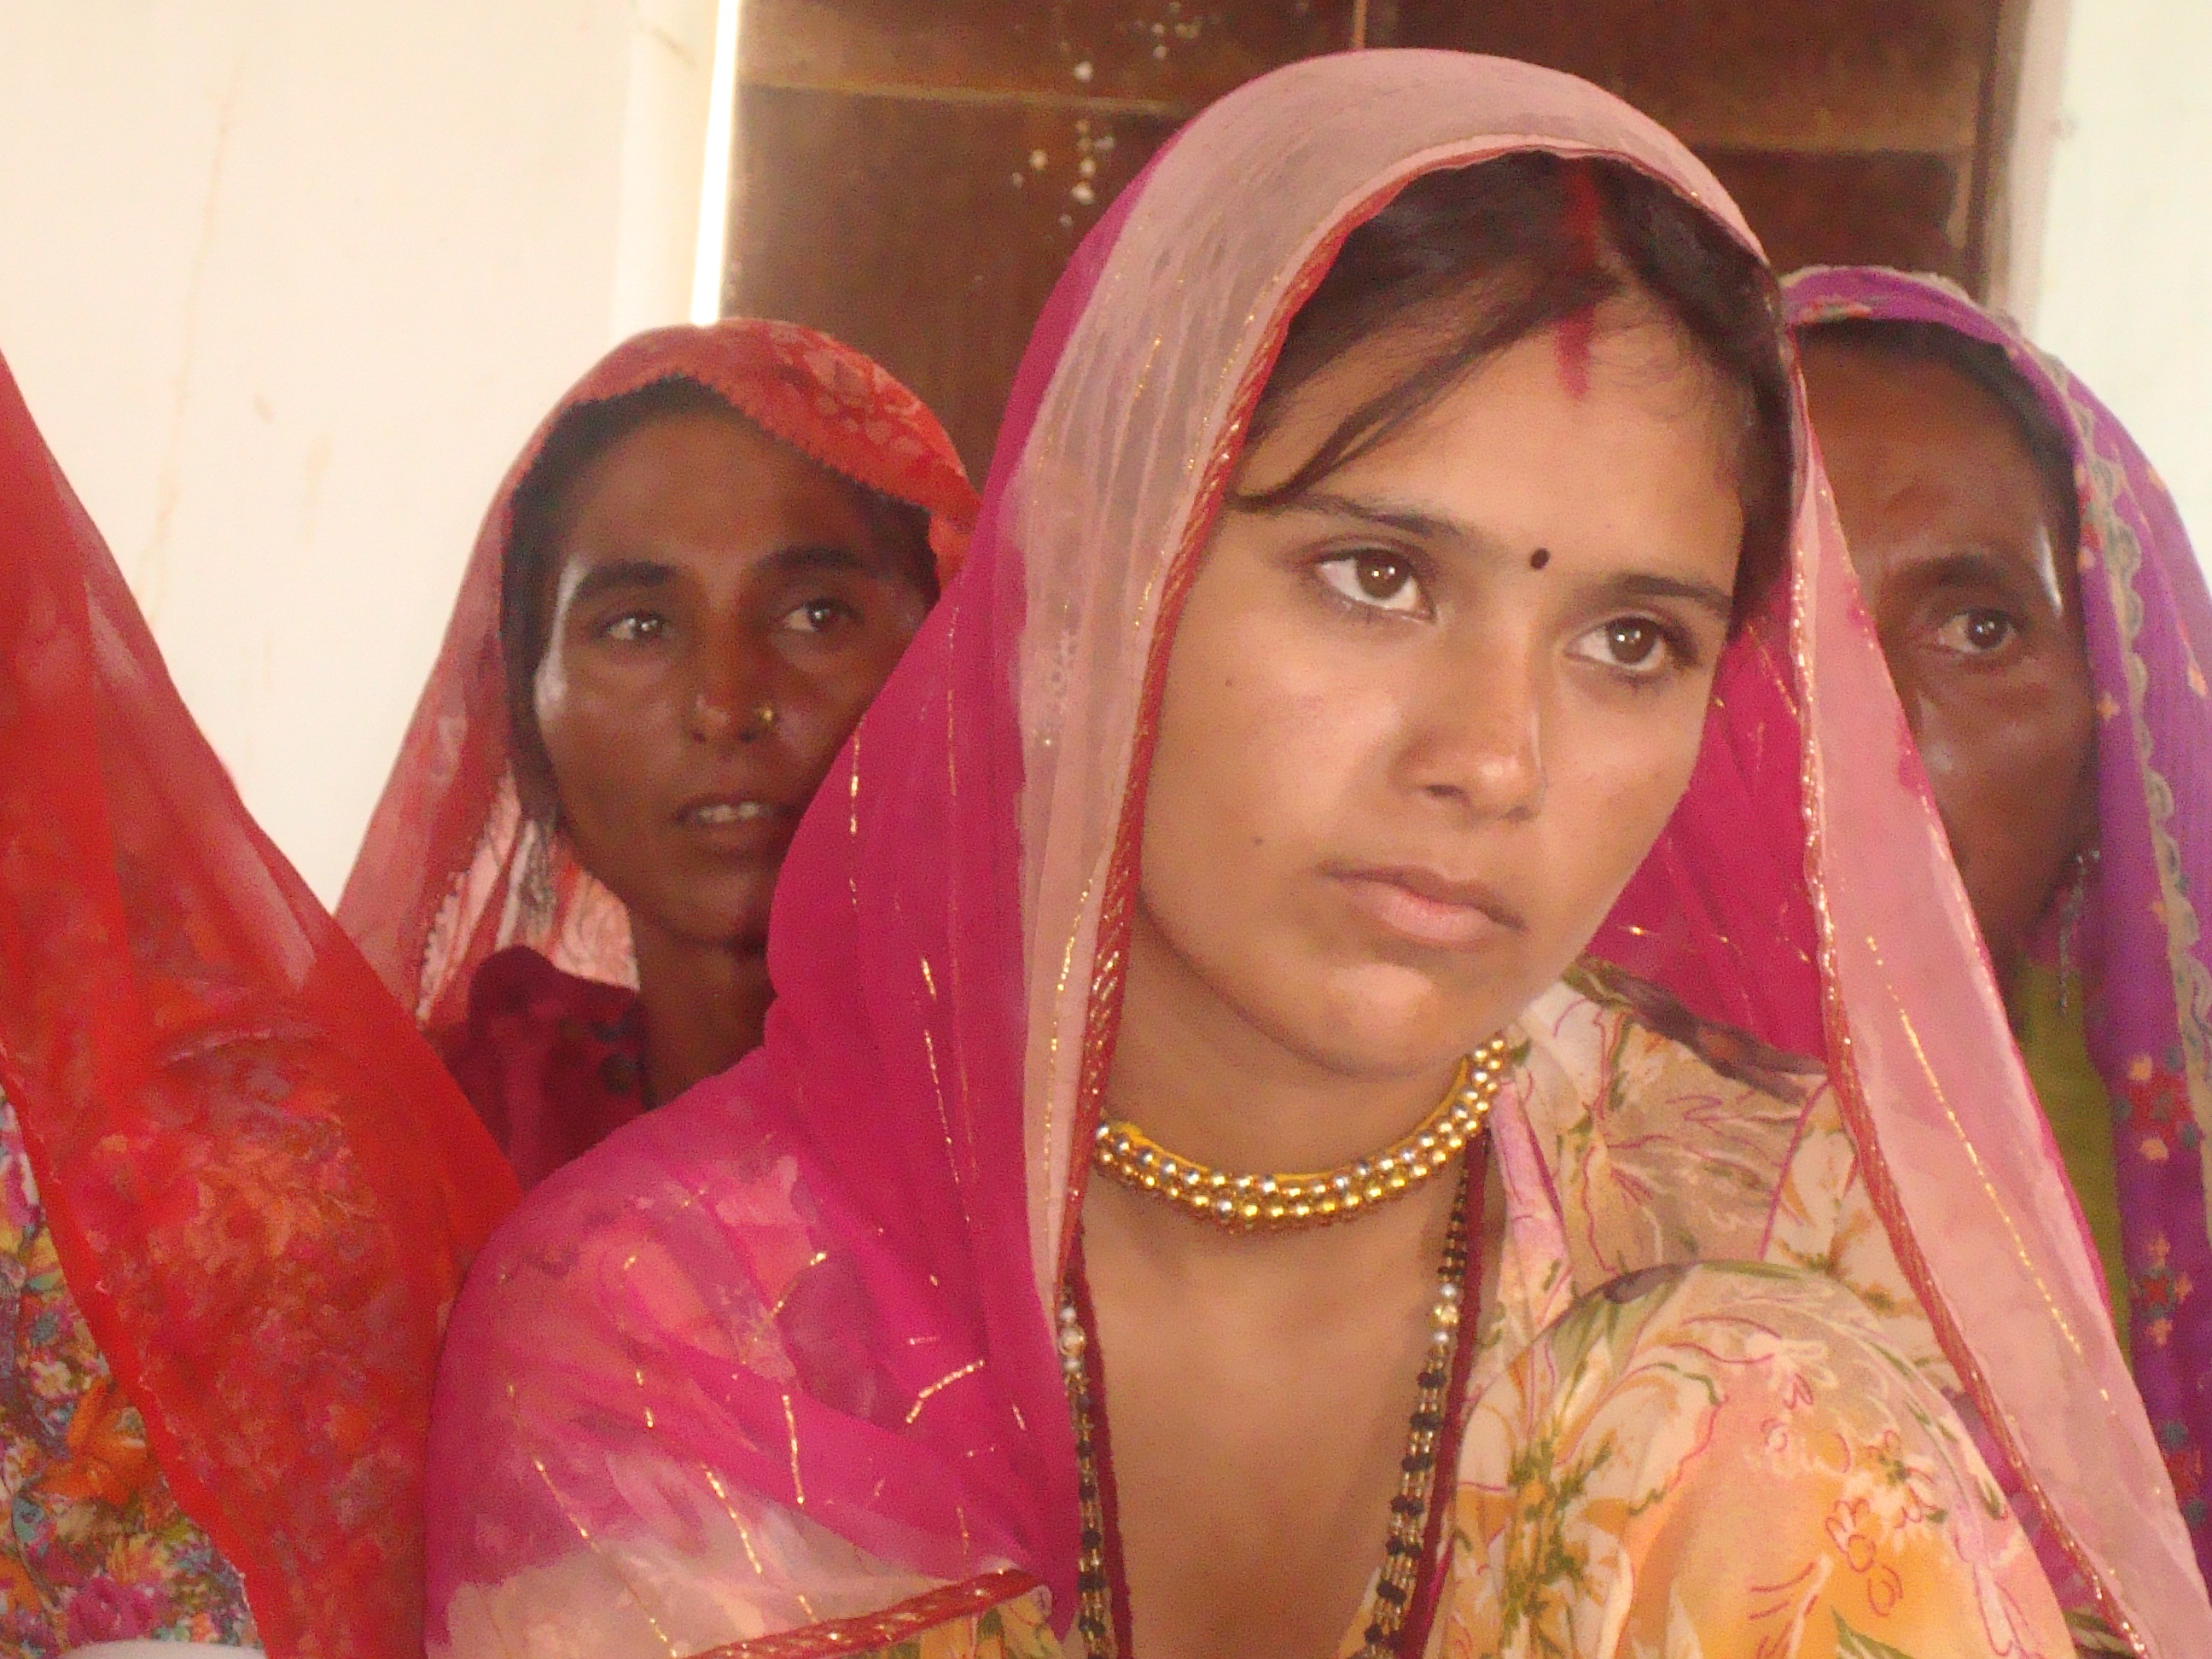 The Shocking Reality of Women's Lives in India – What's Going on at ...